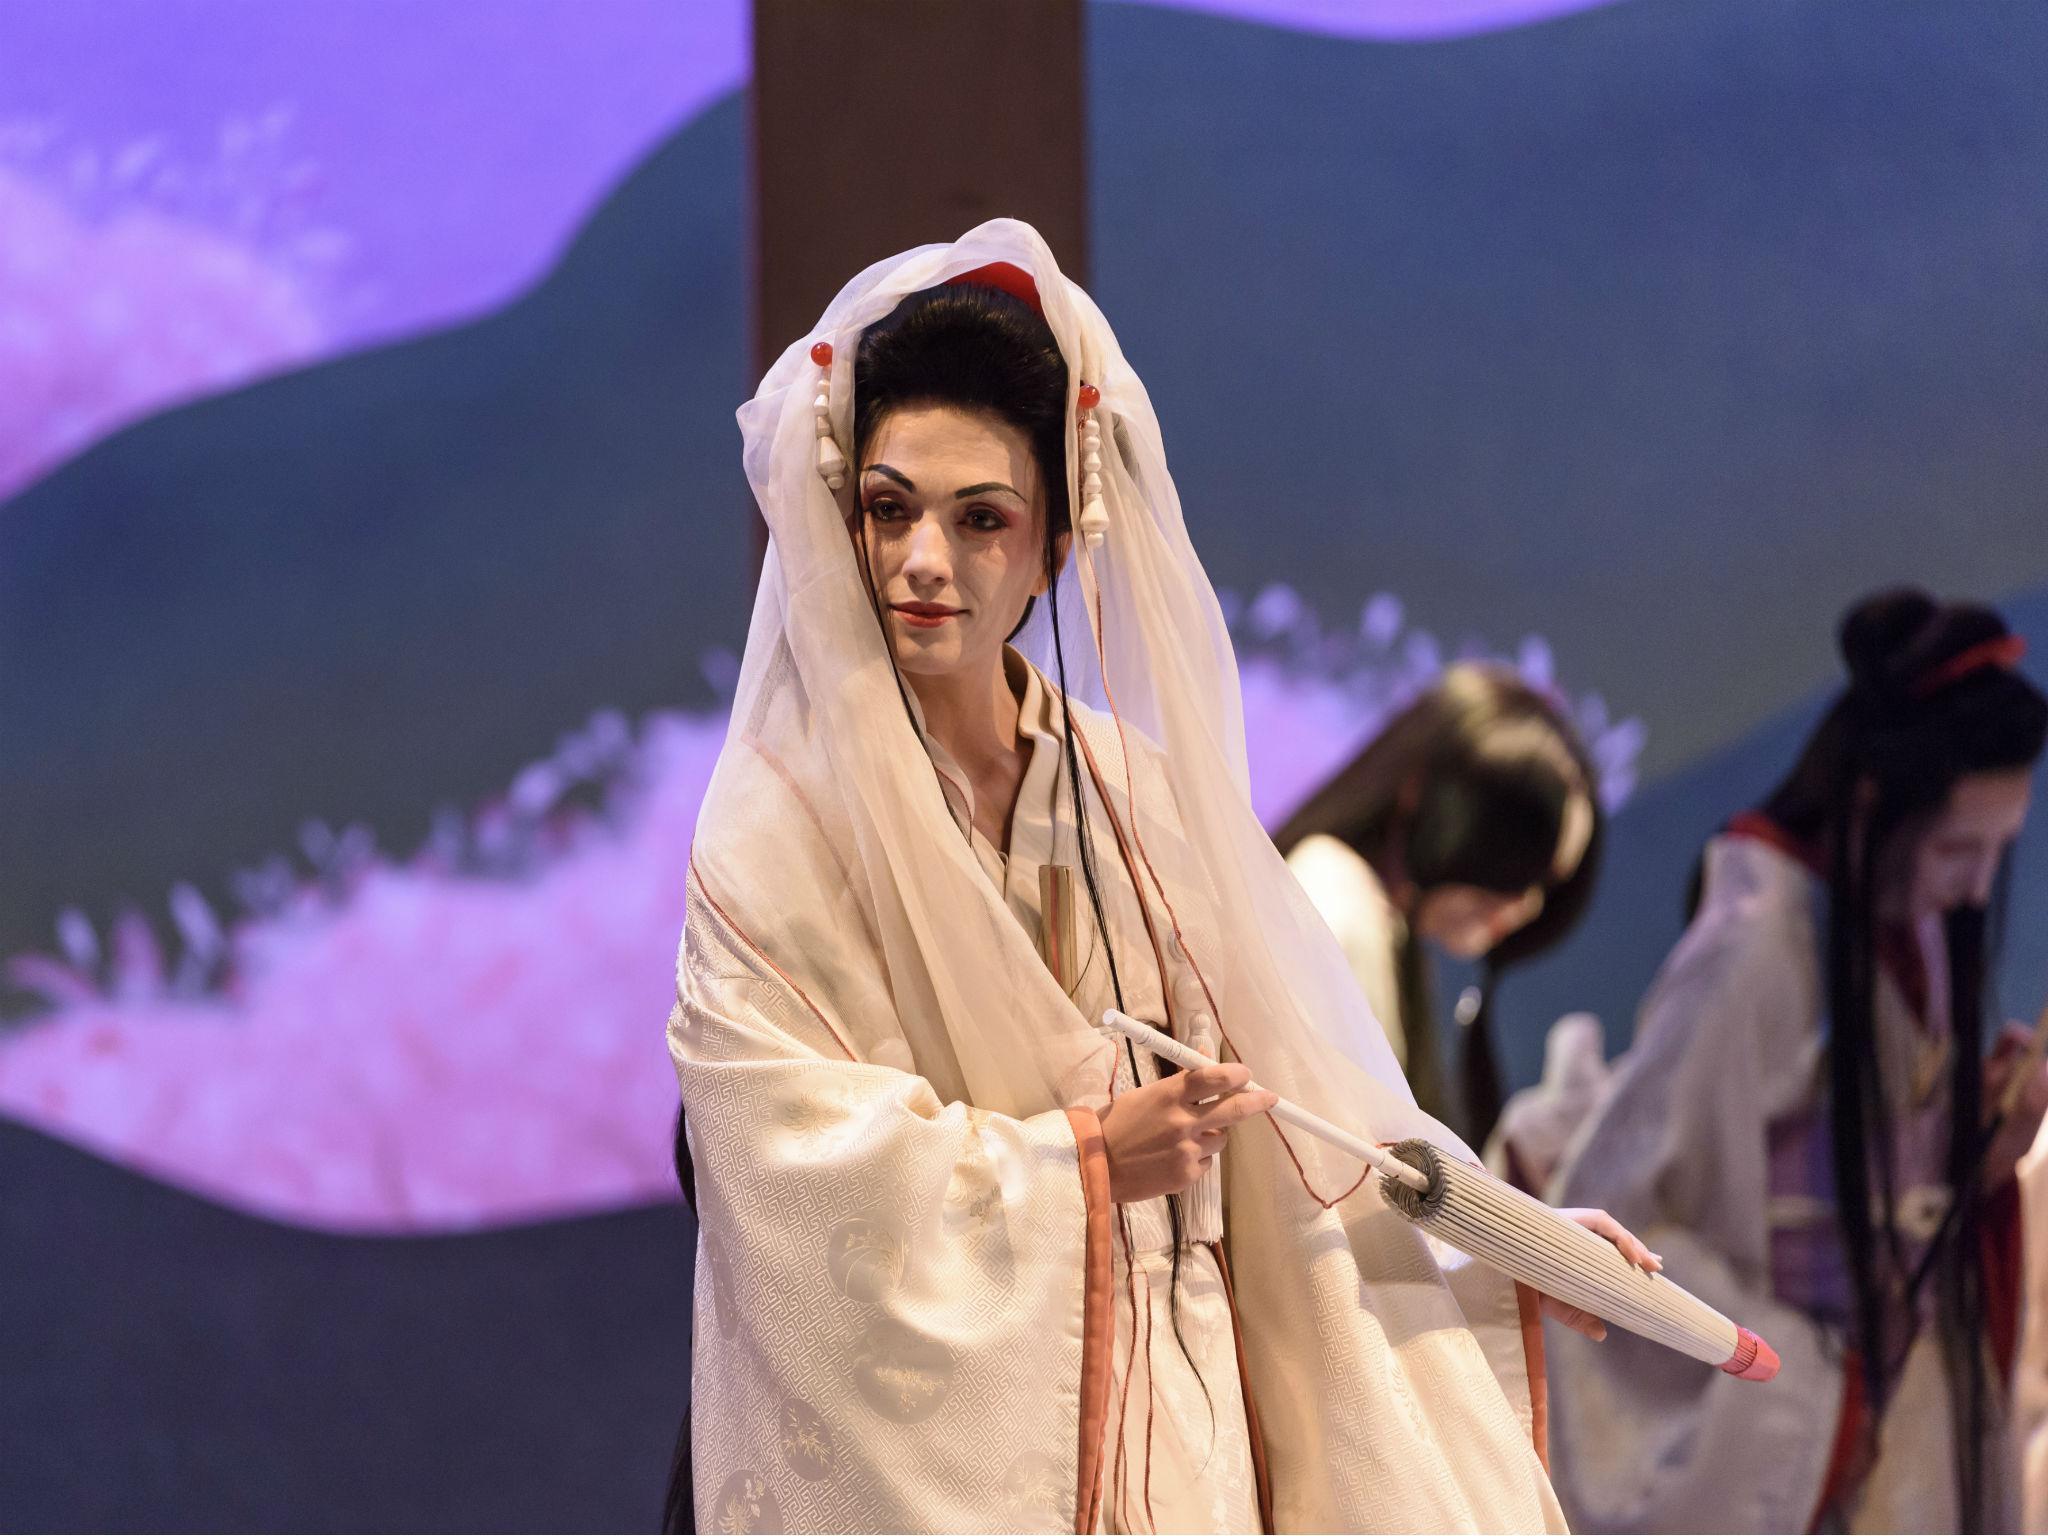 Jaho is the best Madama Butterfly that London has seen in years